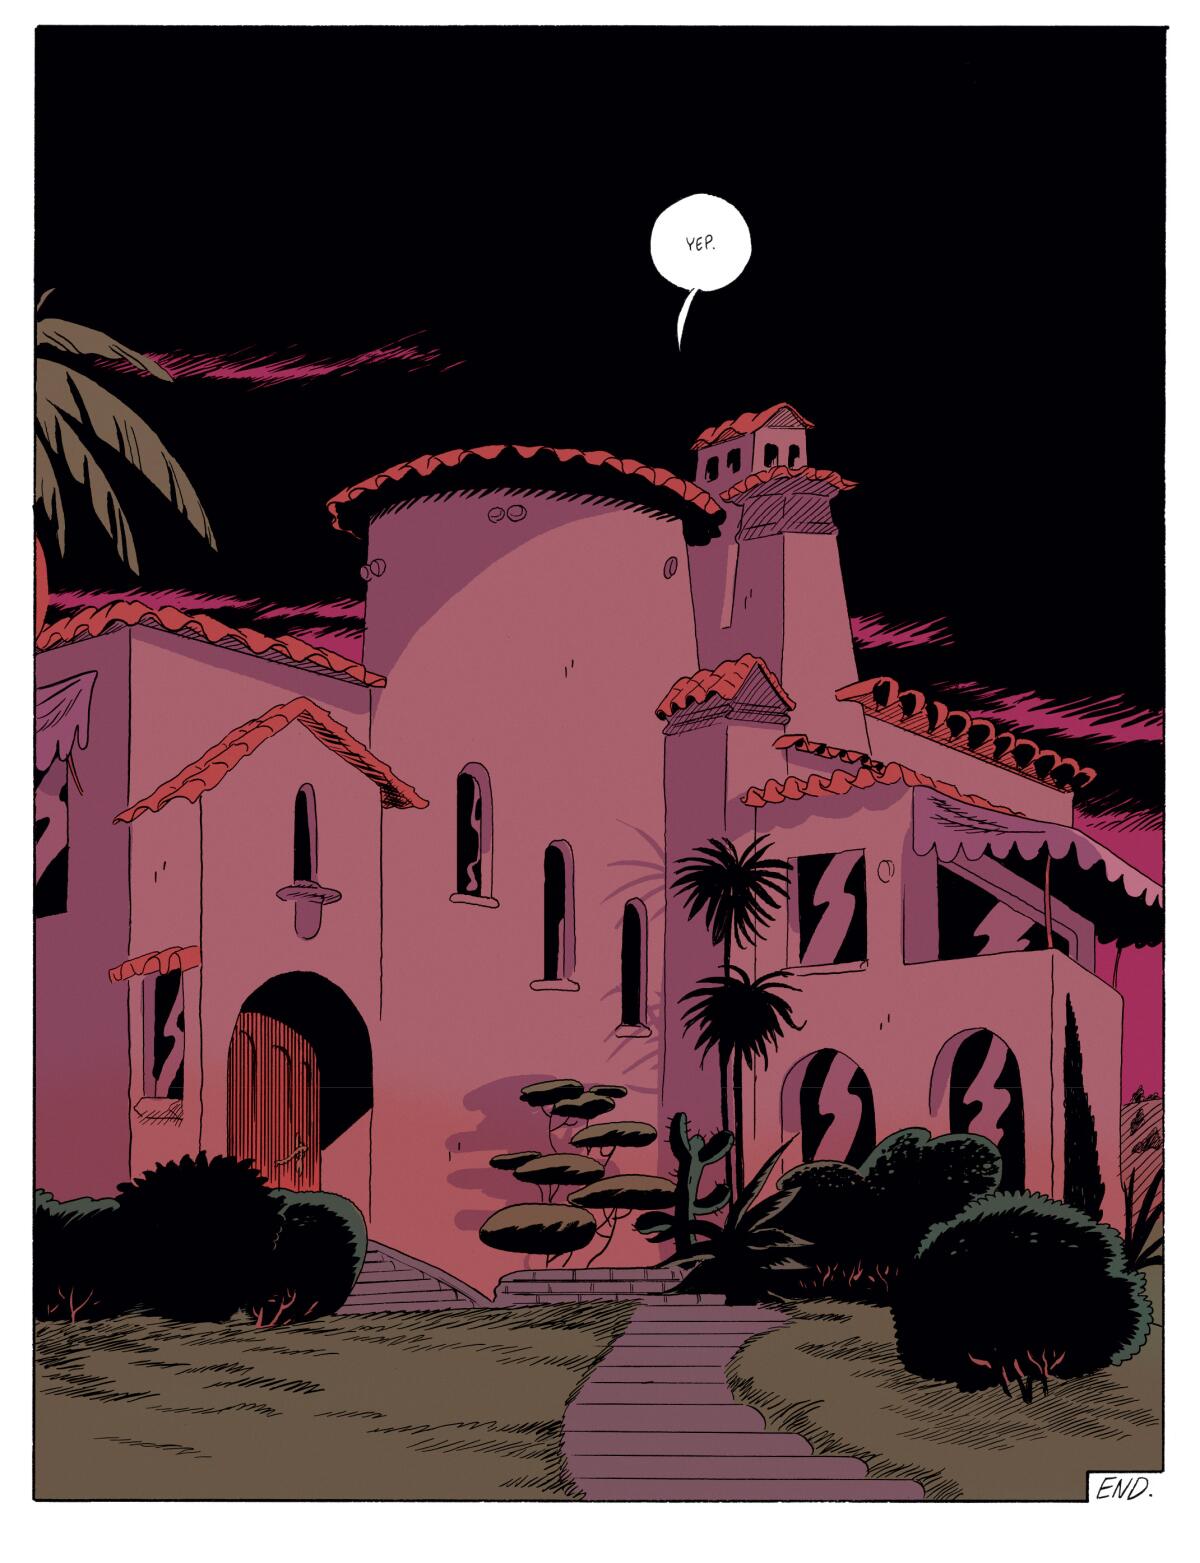 A vertical comic book panel shows a large Spanish Revival house at night and the word "yep" in a speech bubble